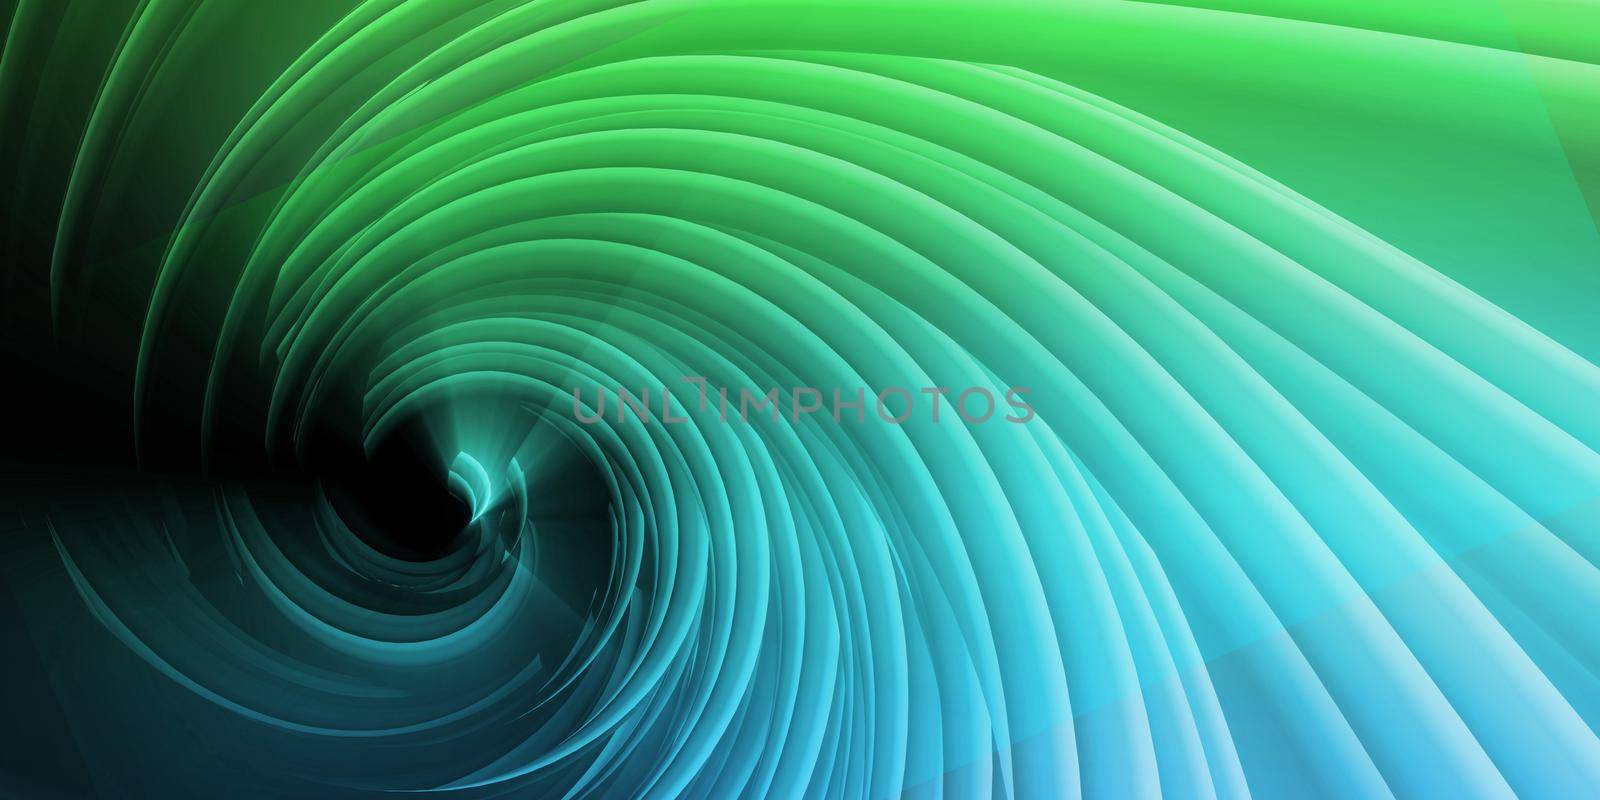 Virtual Tidal Wave Swirl Abstract Background Future Concept